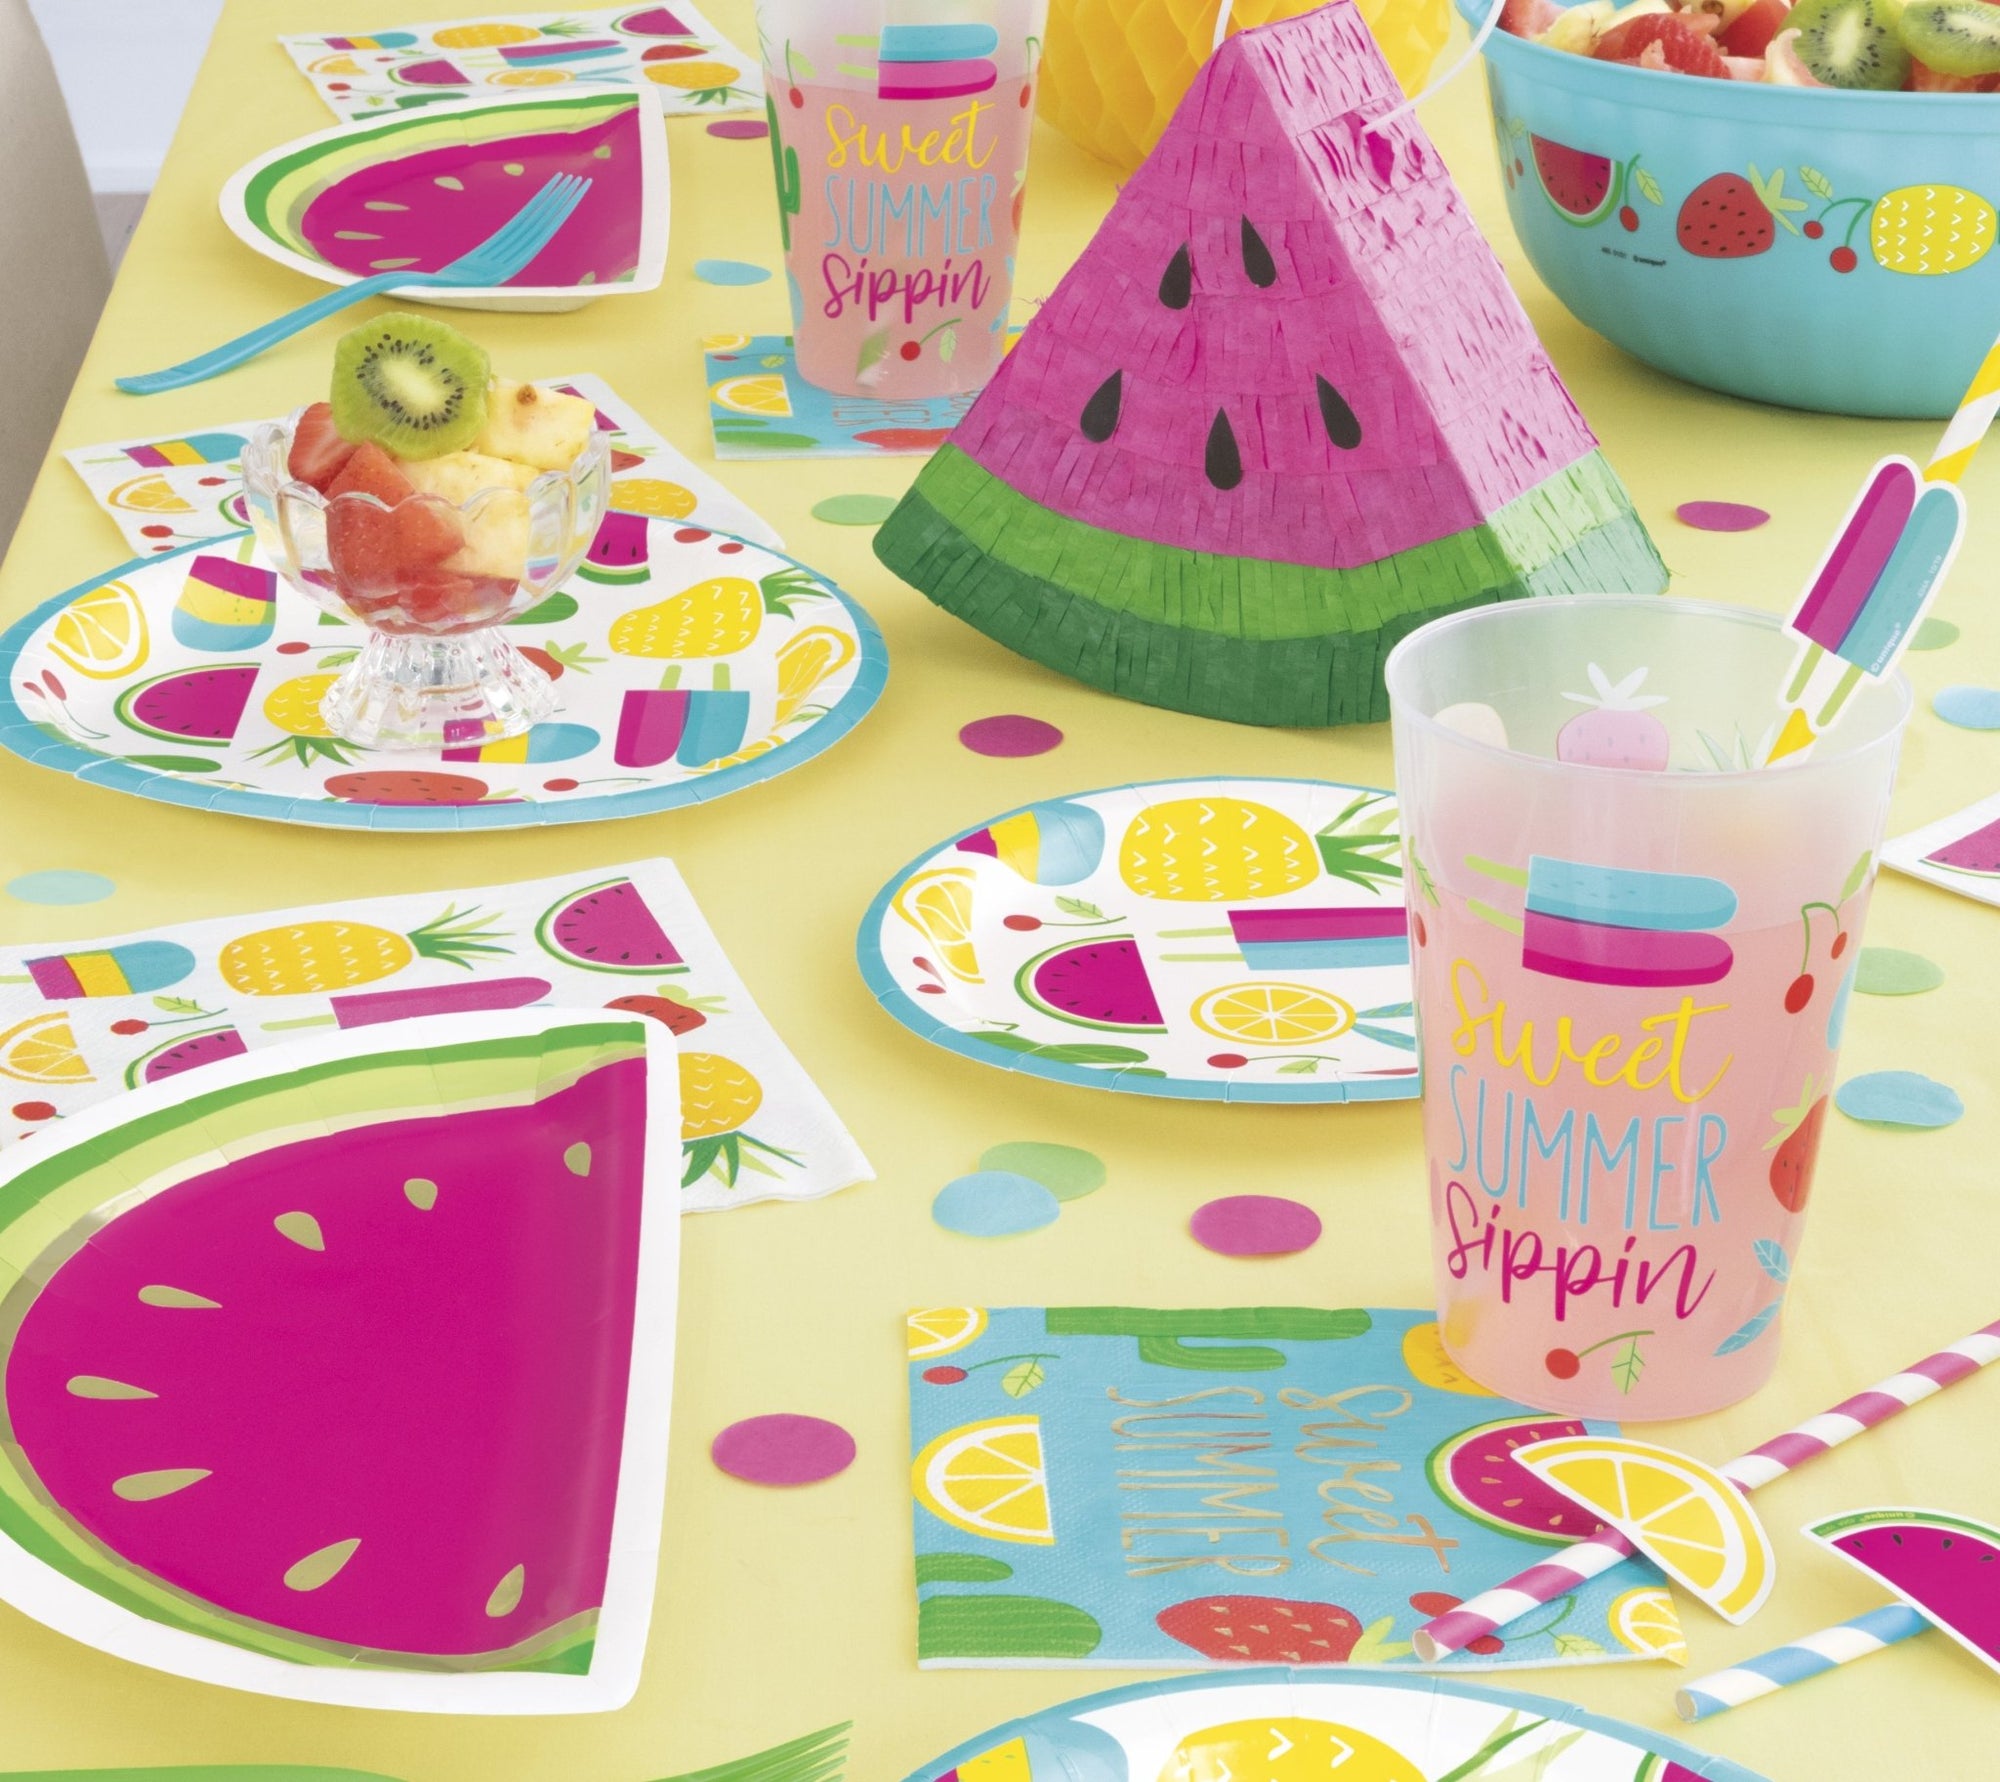 Pink Watermelon Shaped Party Plates - Stesha Party